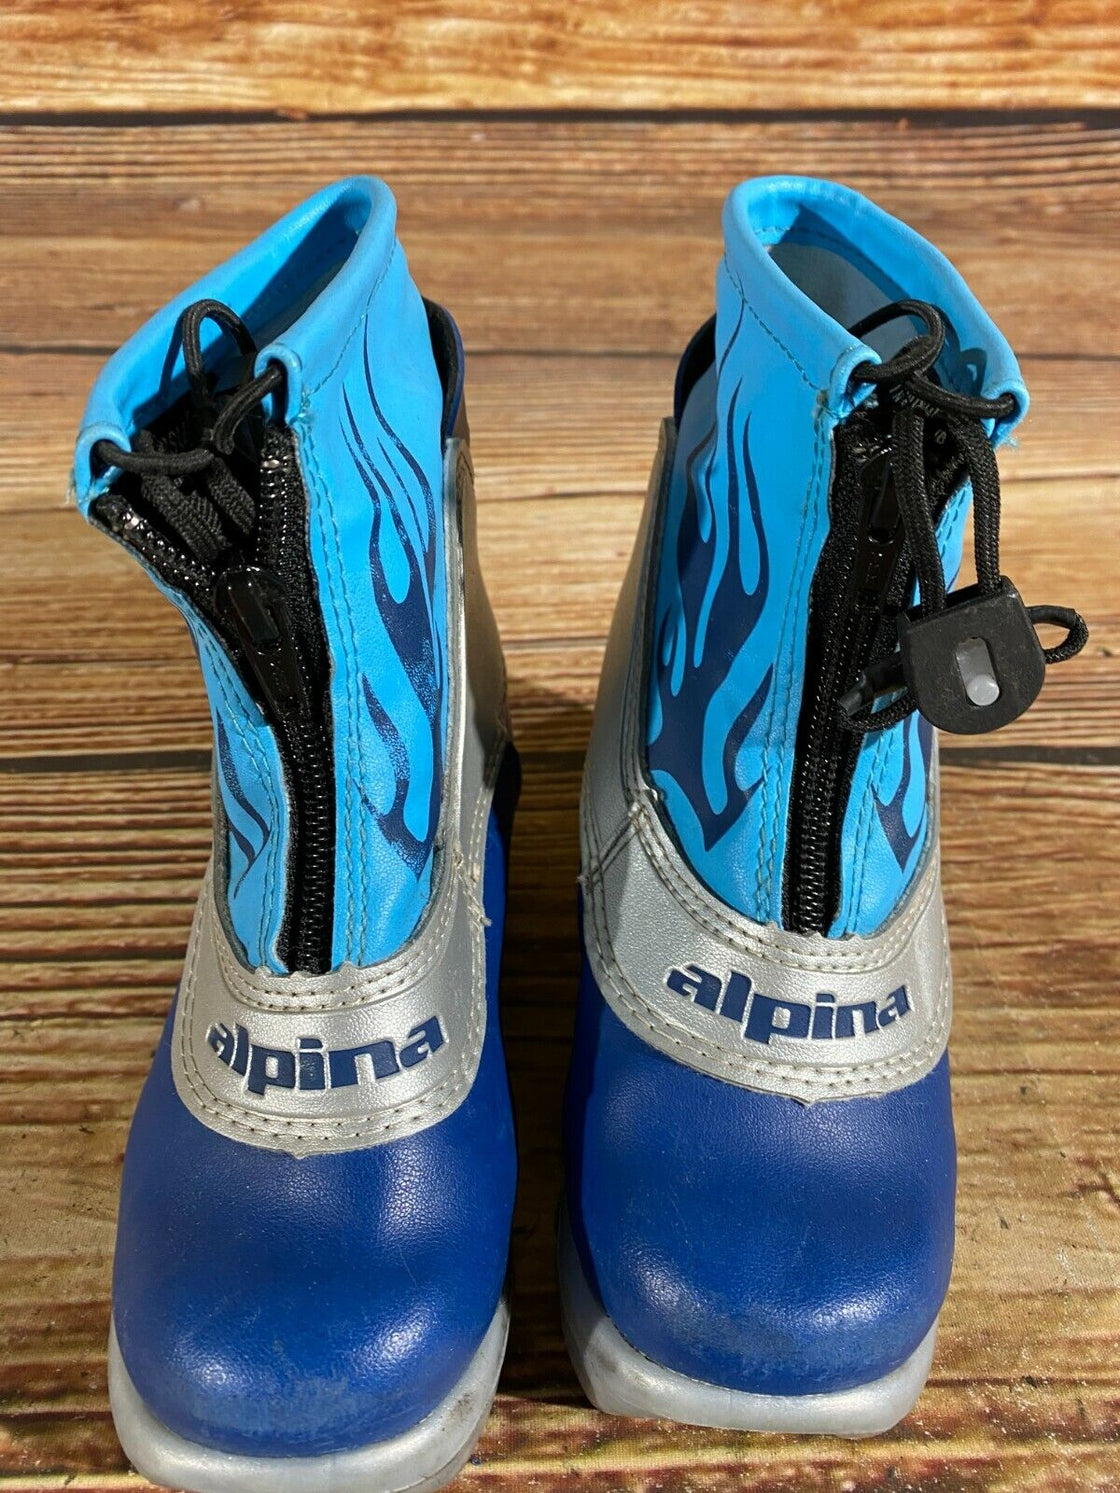 Alpina Frost Kids Nordic Cross Country Ski Boots Size EU28 US10.5 for NNN A-17